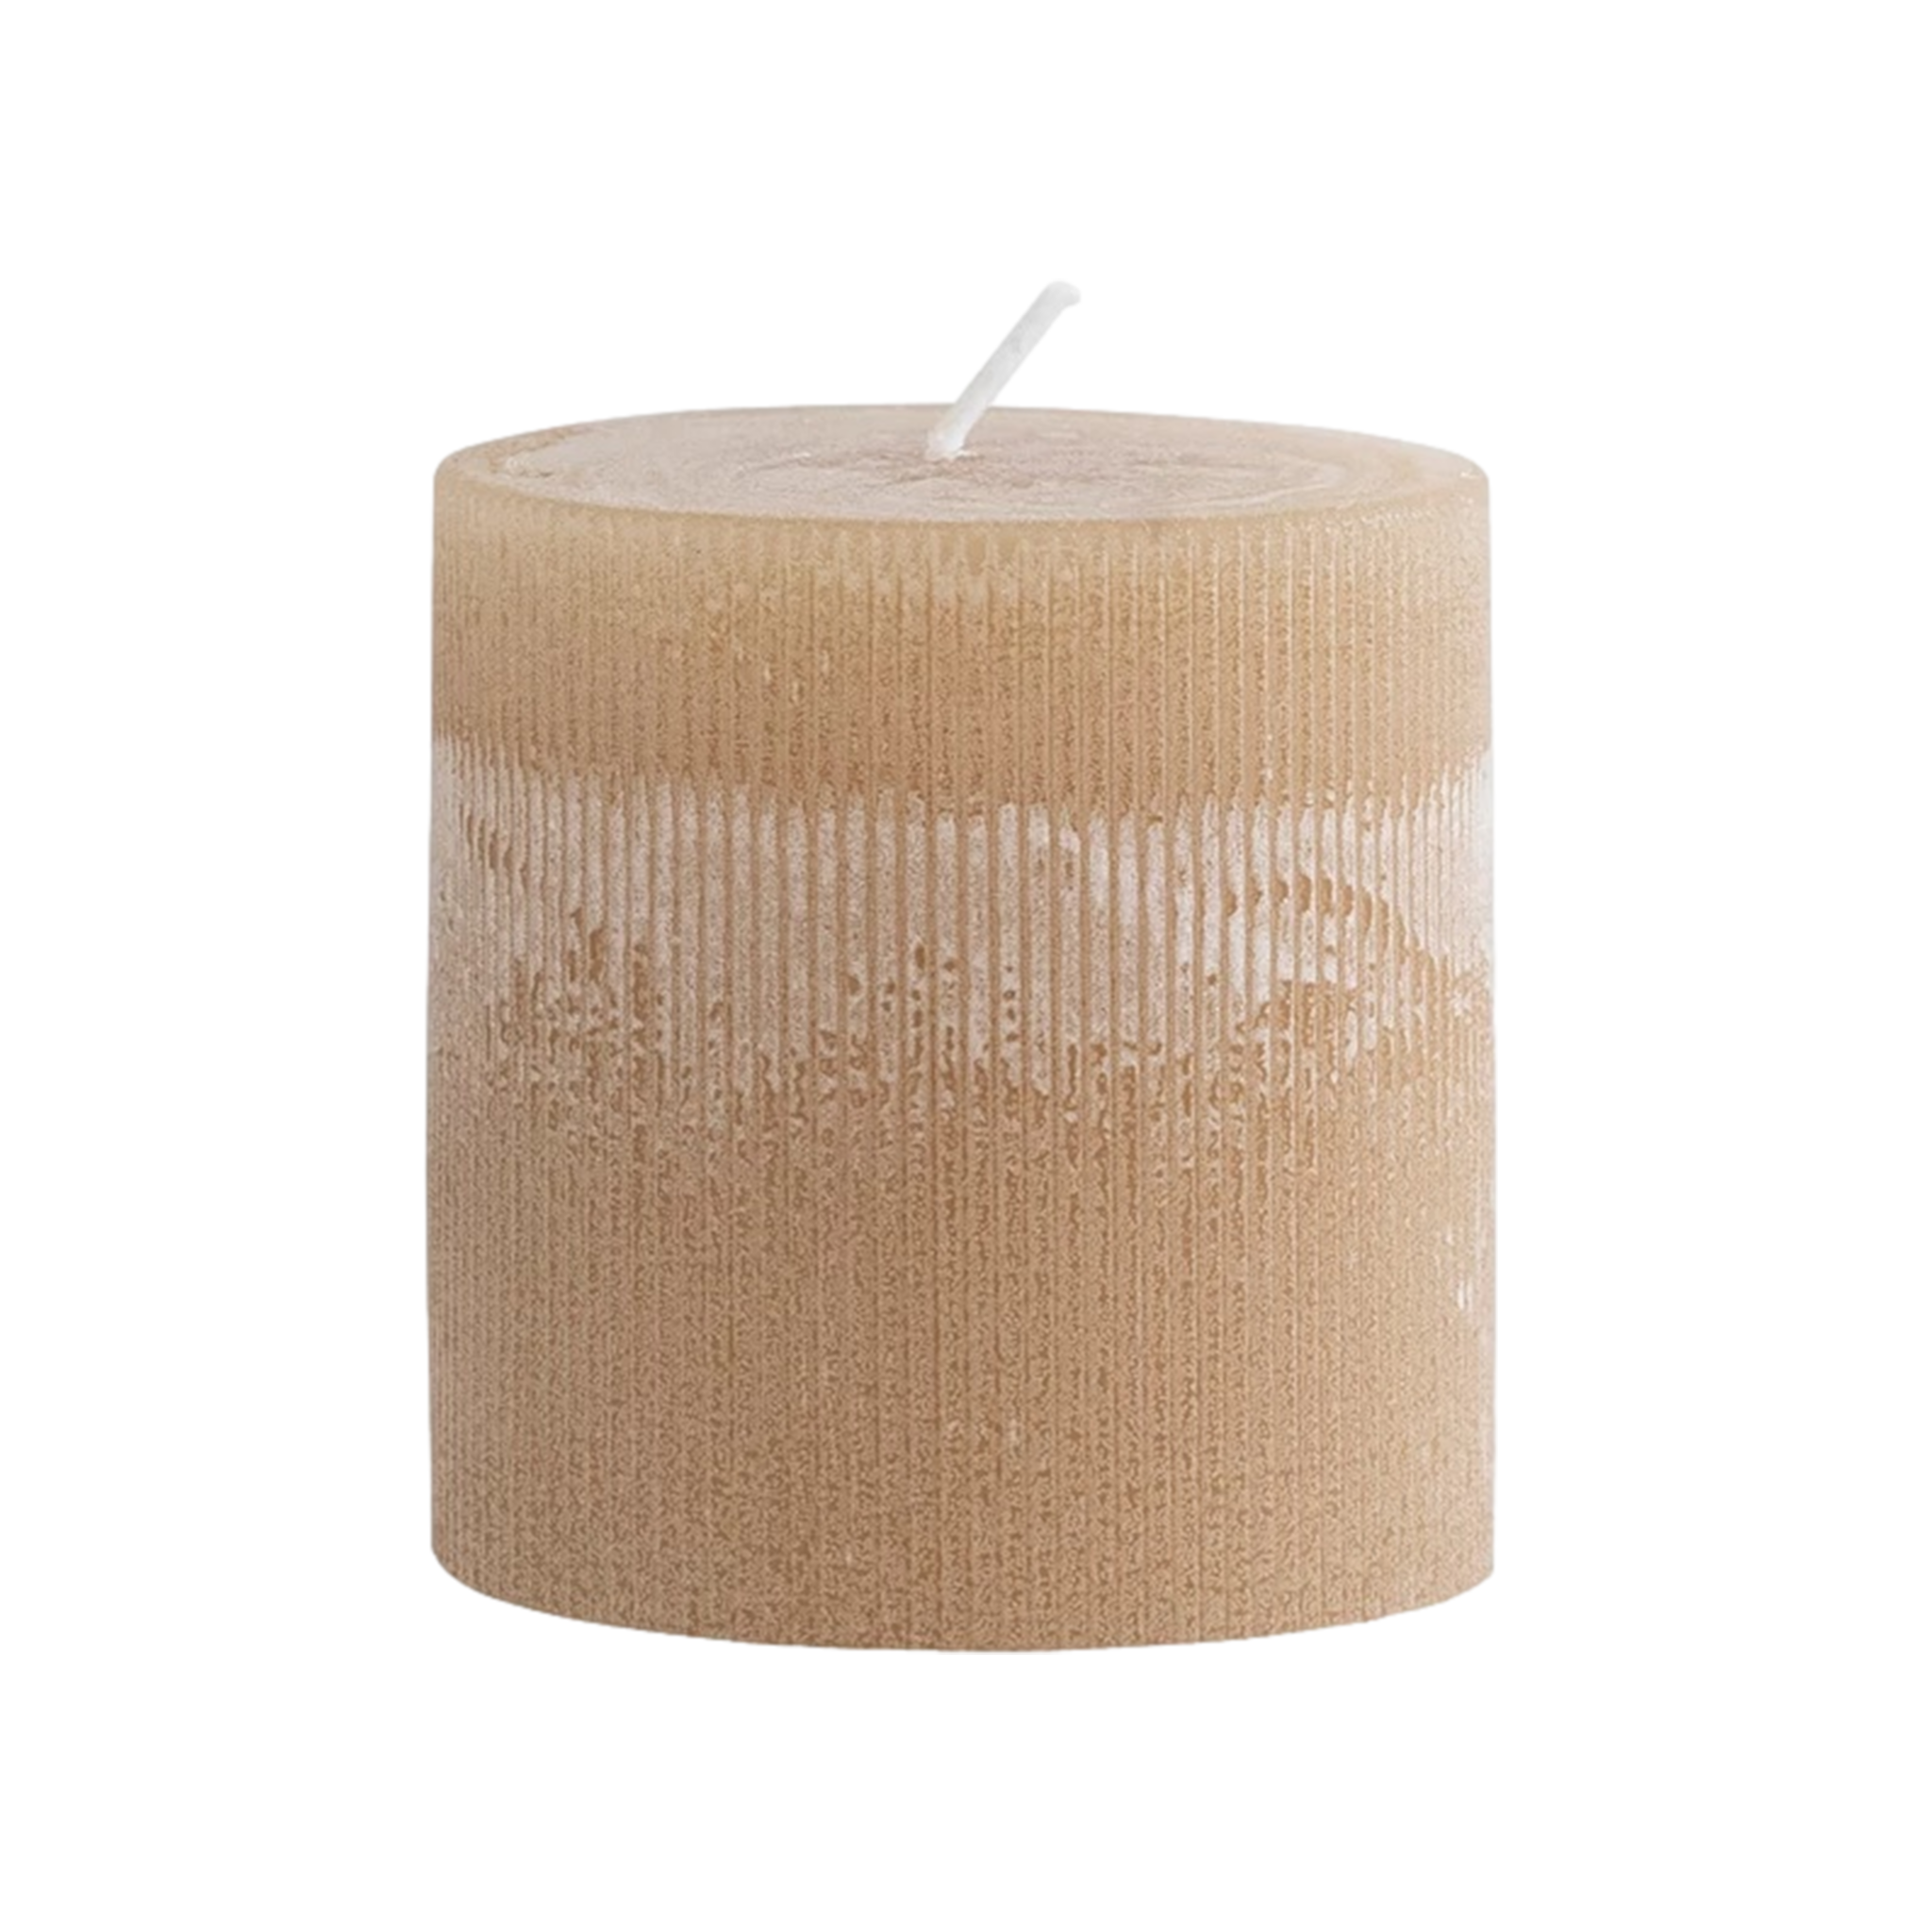 Pleated Pillar Candle in Linen